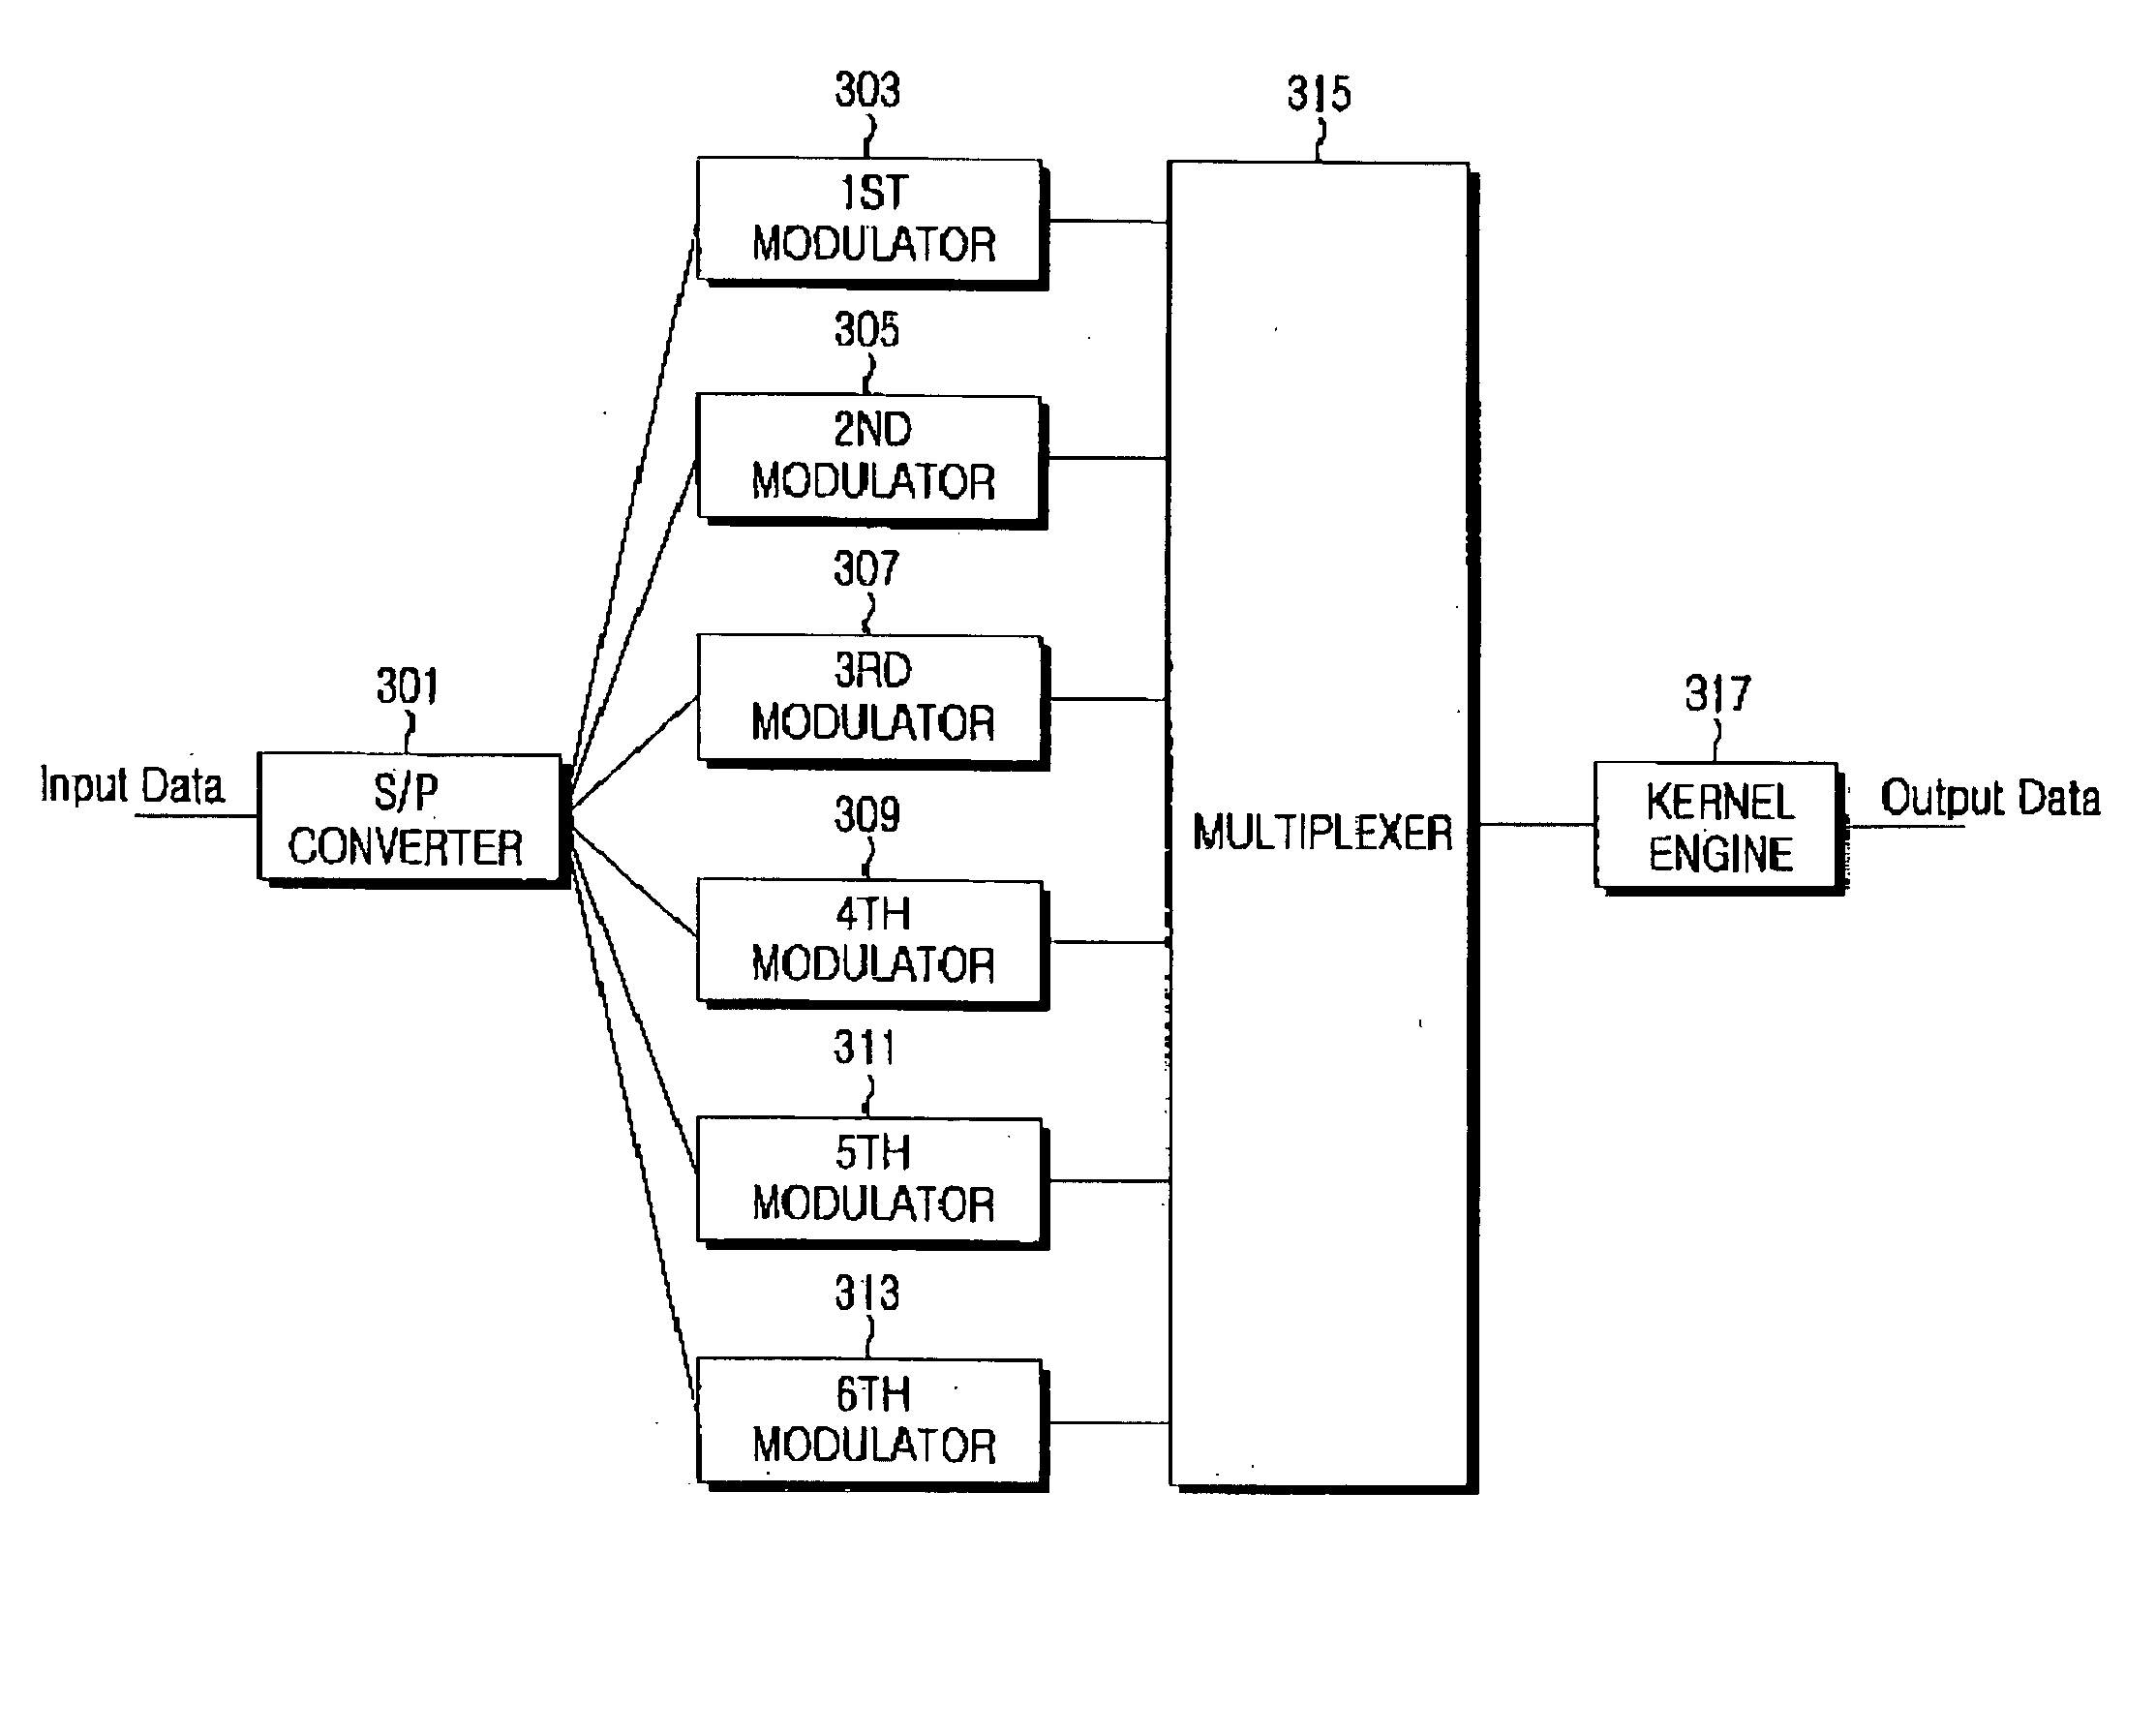 Apparatus and method for reducing a peak to average power ratio in a multi-carrier communication system